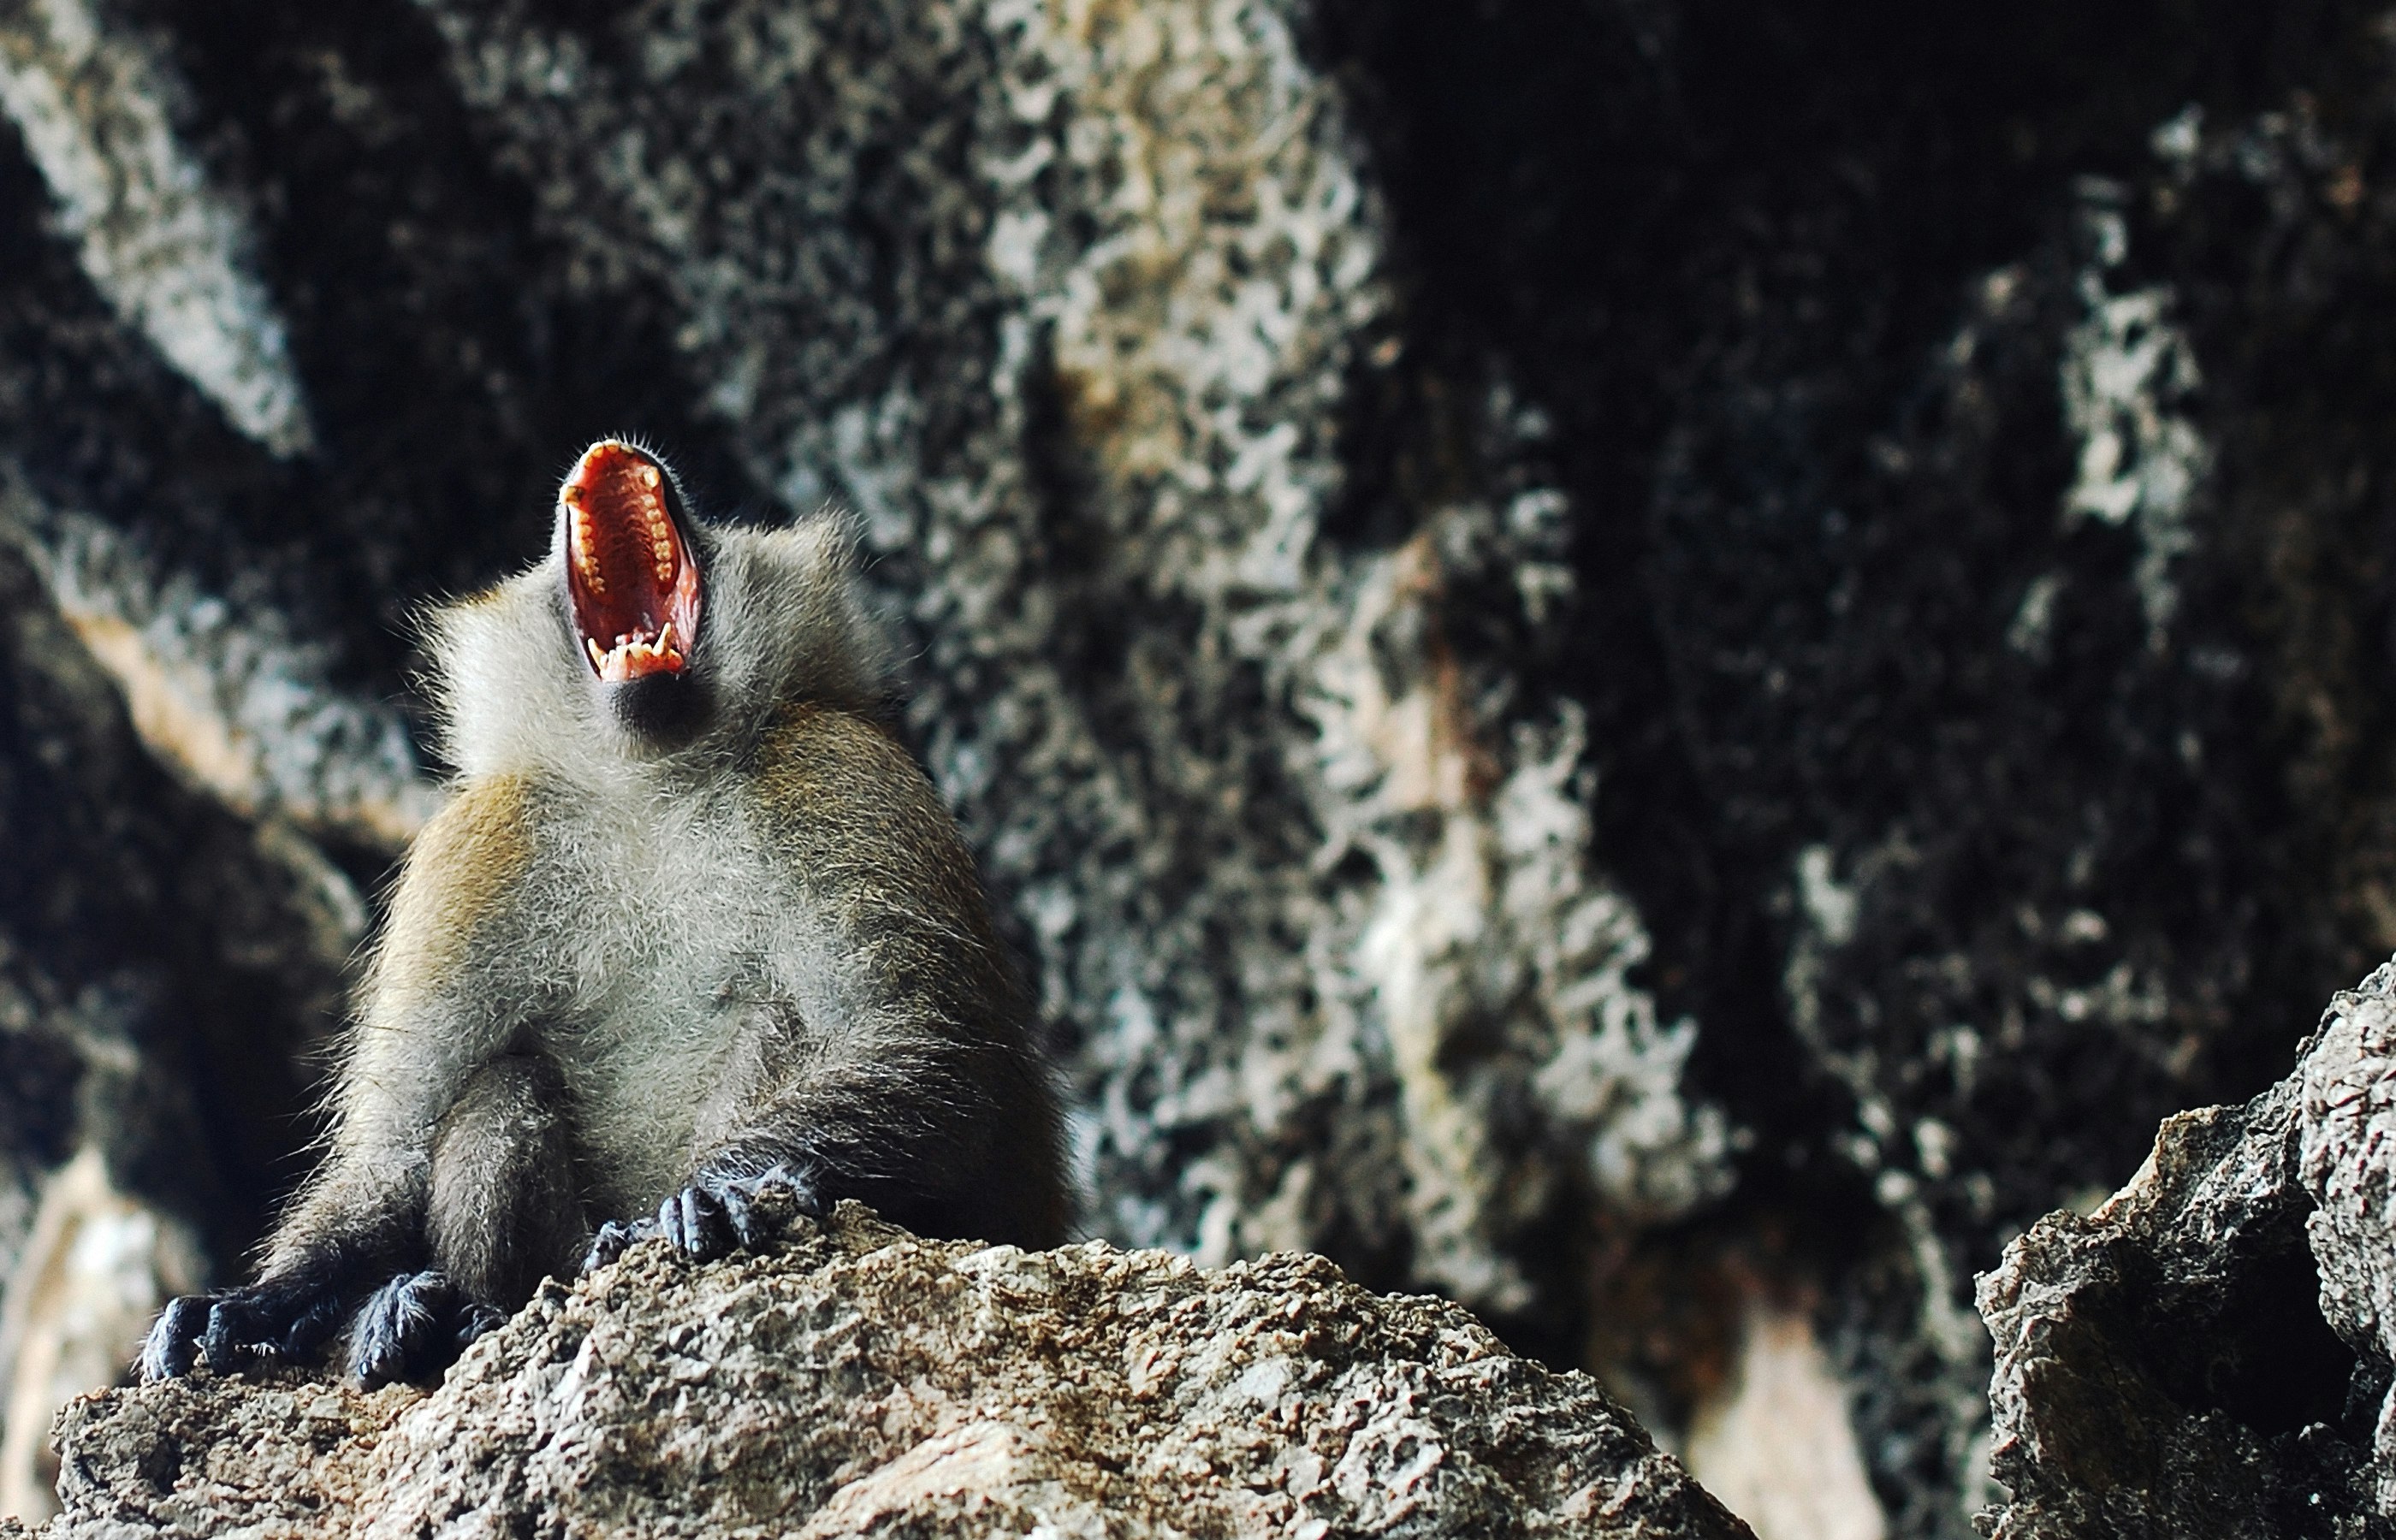 Photo of frustrated monkey by Asa Rodger on Unsplash